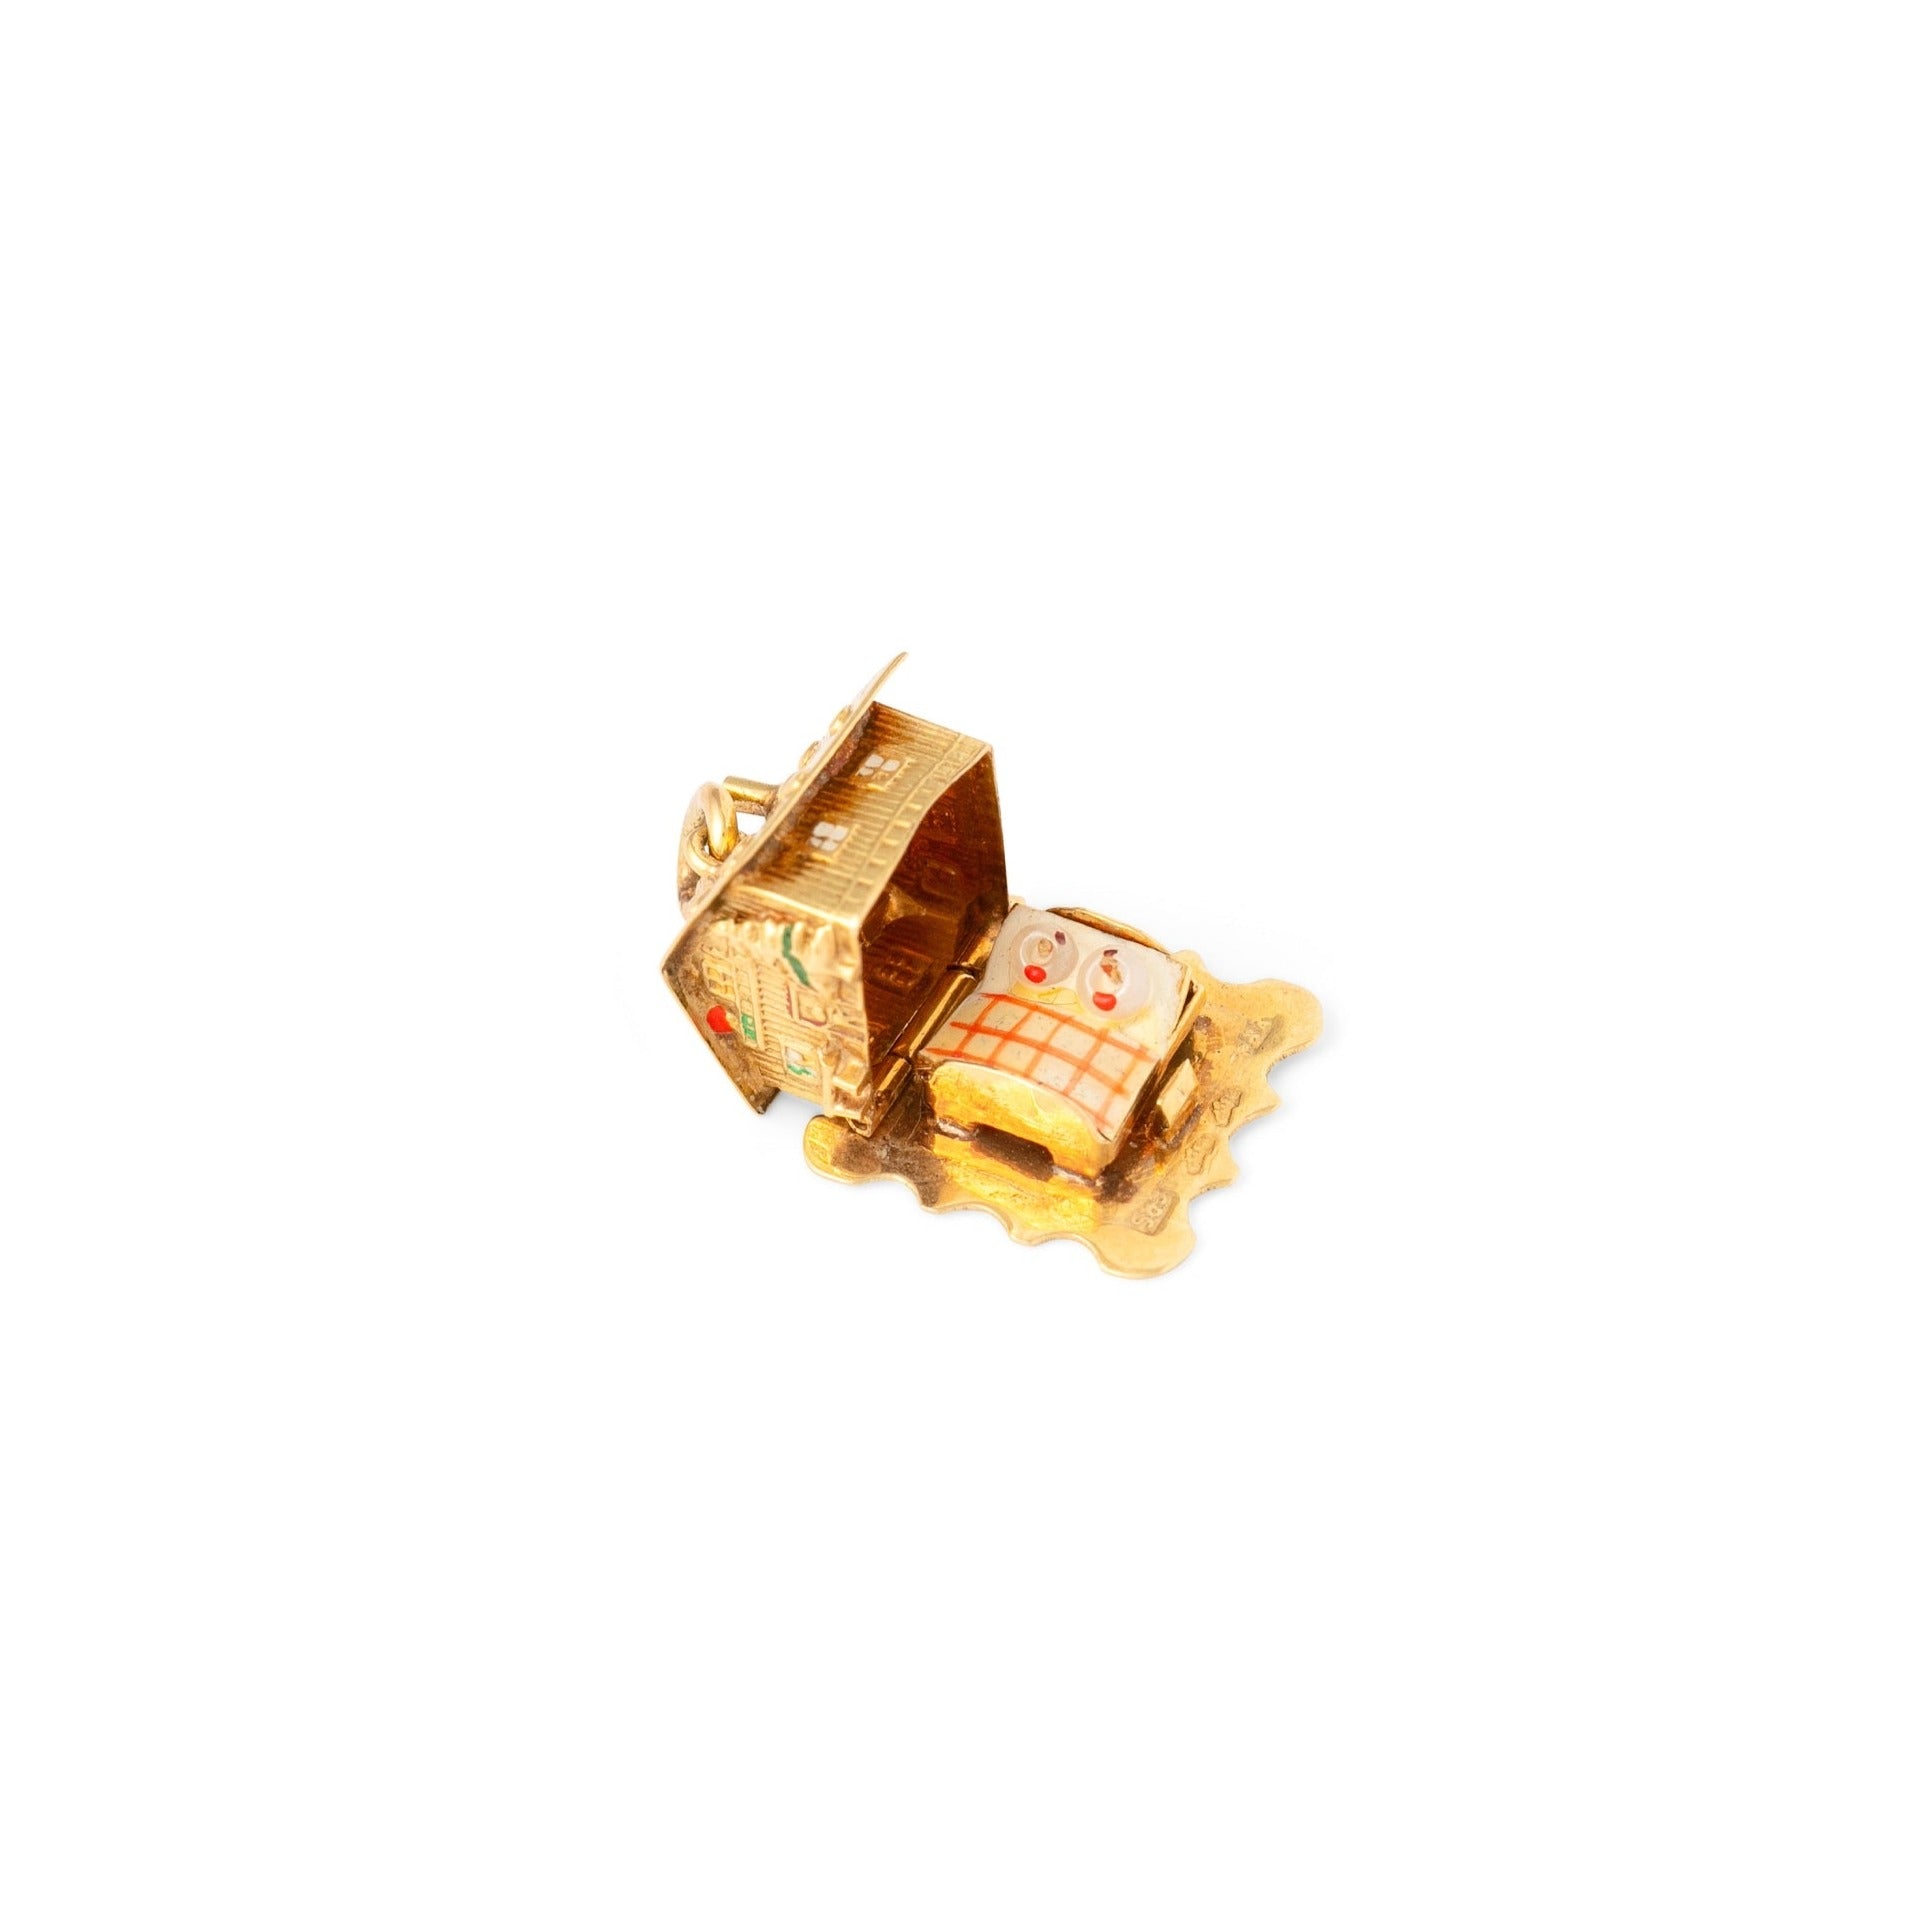 Austrian 14k Gold and Enamel Movable House Charm